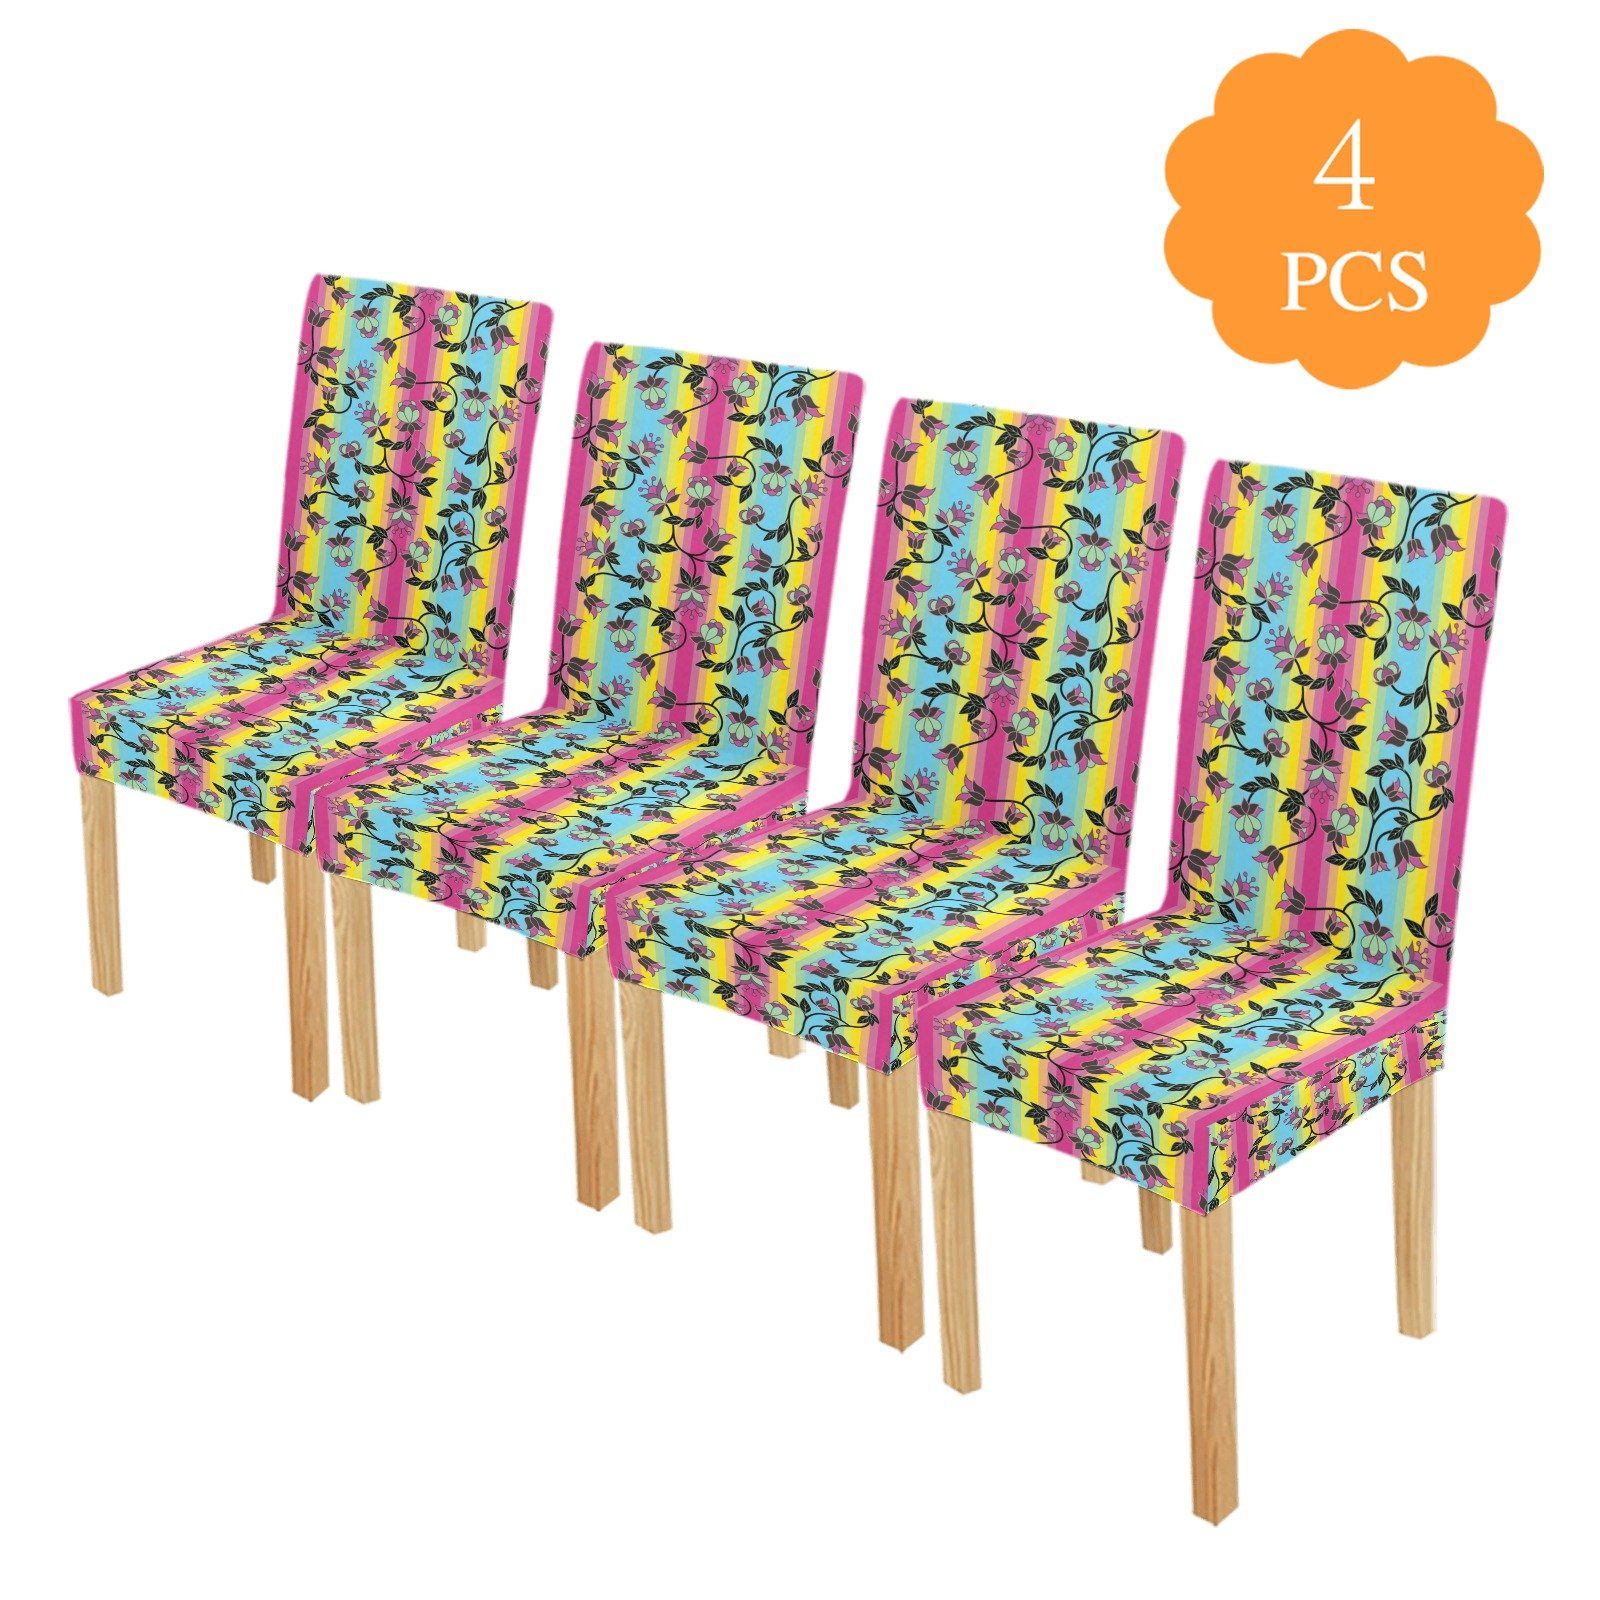 Powwow Carnival Chair Cover (Pack of 4) Chair Cover (Pack of 4) e-joyer 